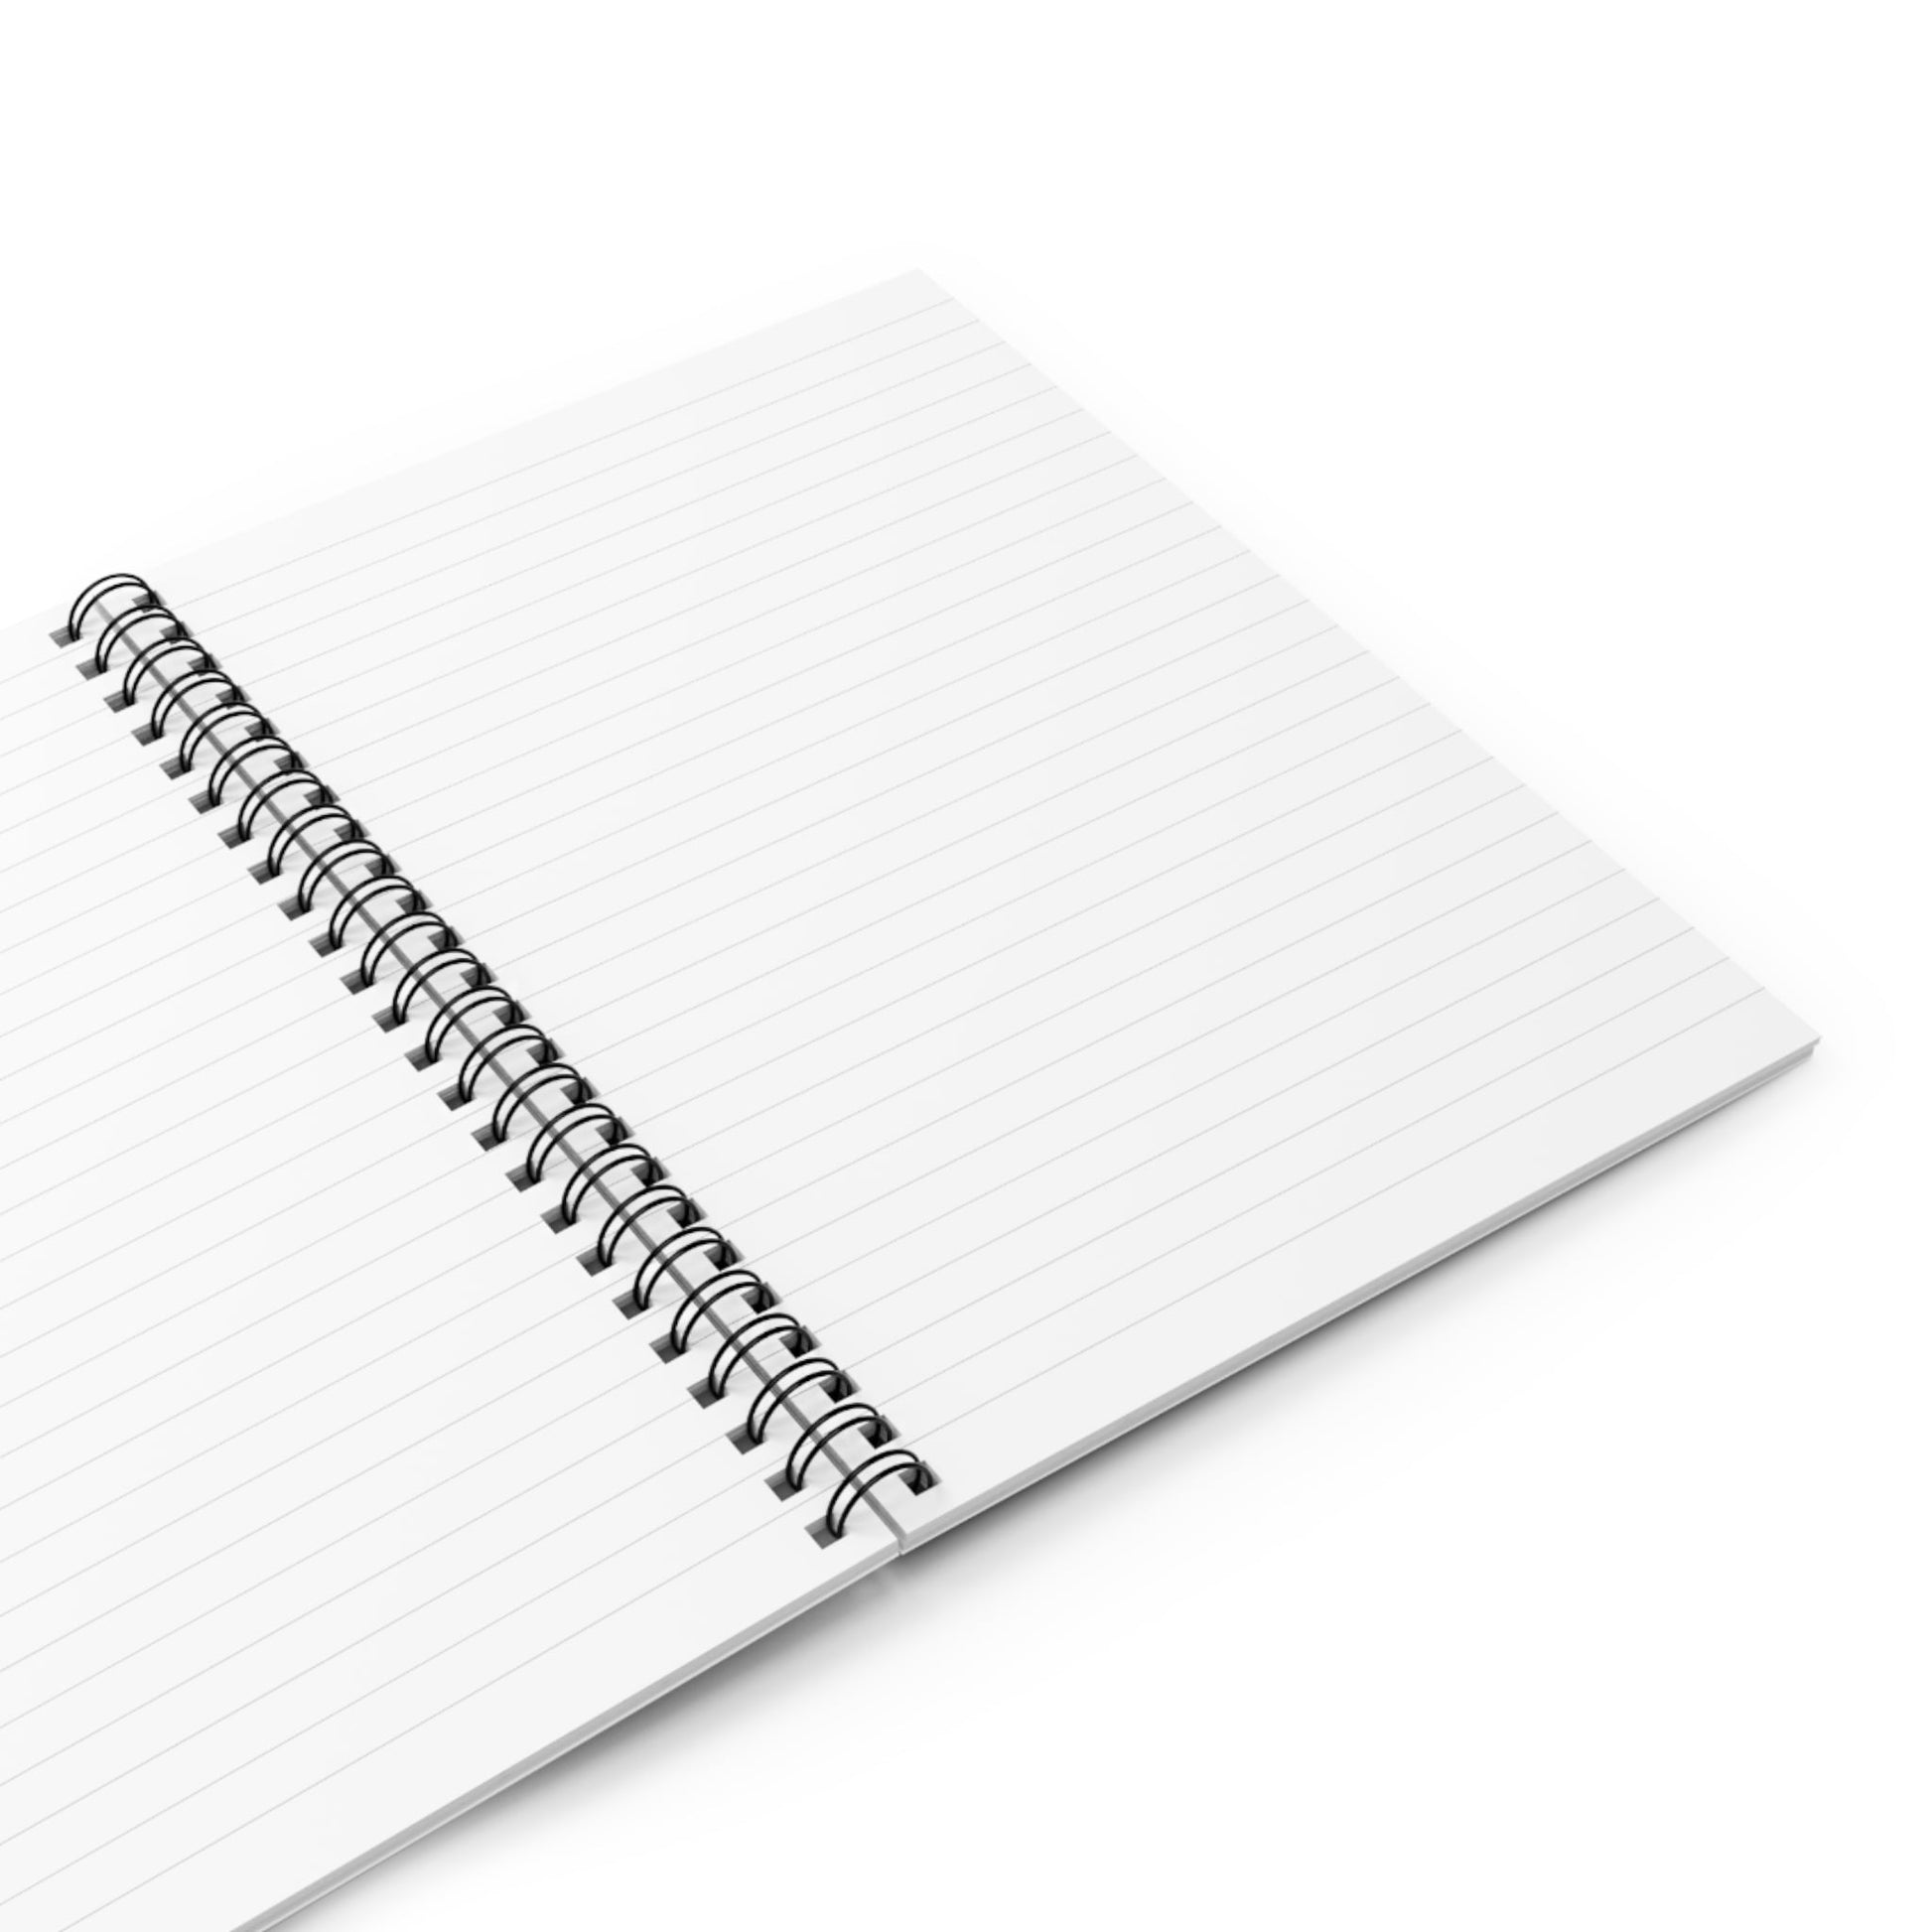 Spiral Notebook with Snowy Mountains Cover Opened with Blank White College Ruled Pages